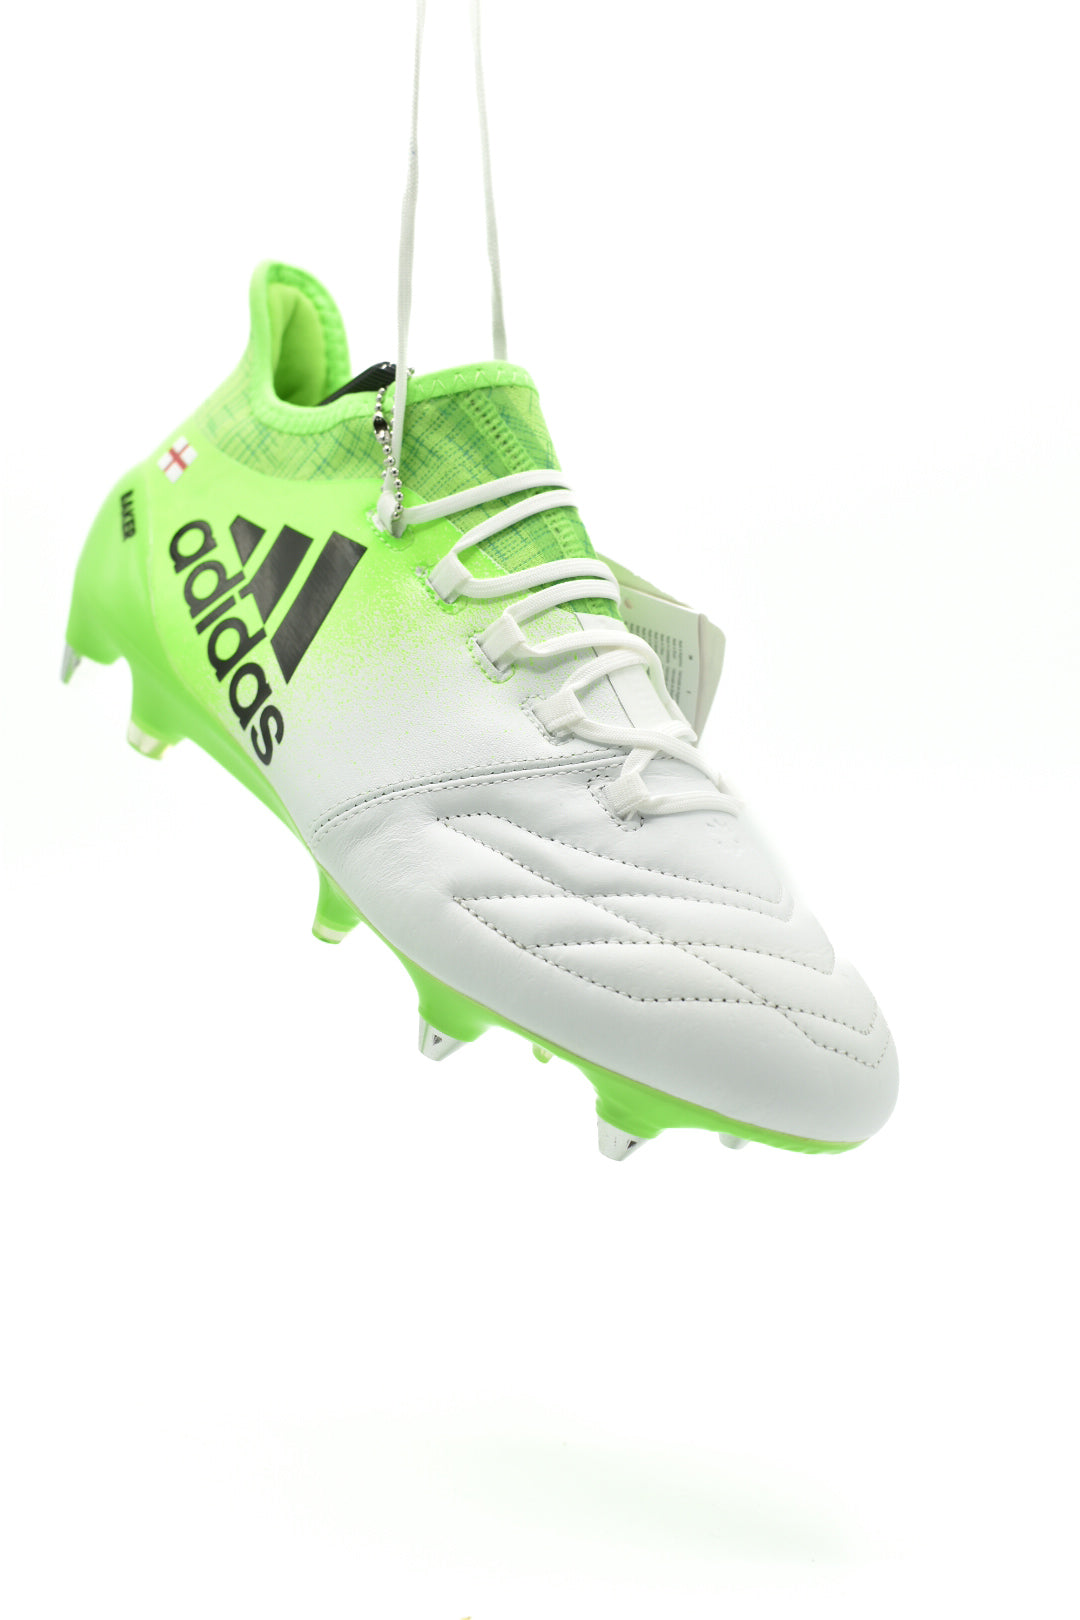 Exagerar lb estas ADIDAS X 16.1 LEATHER SG 'PLAYER ISSUED' – Dutch Boot Collector (DBC)